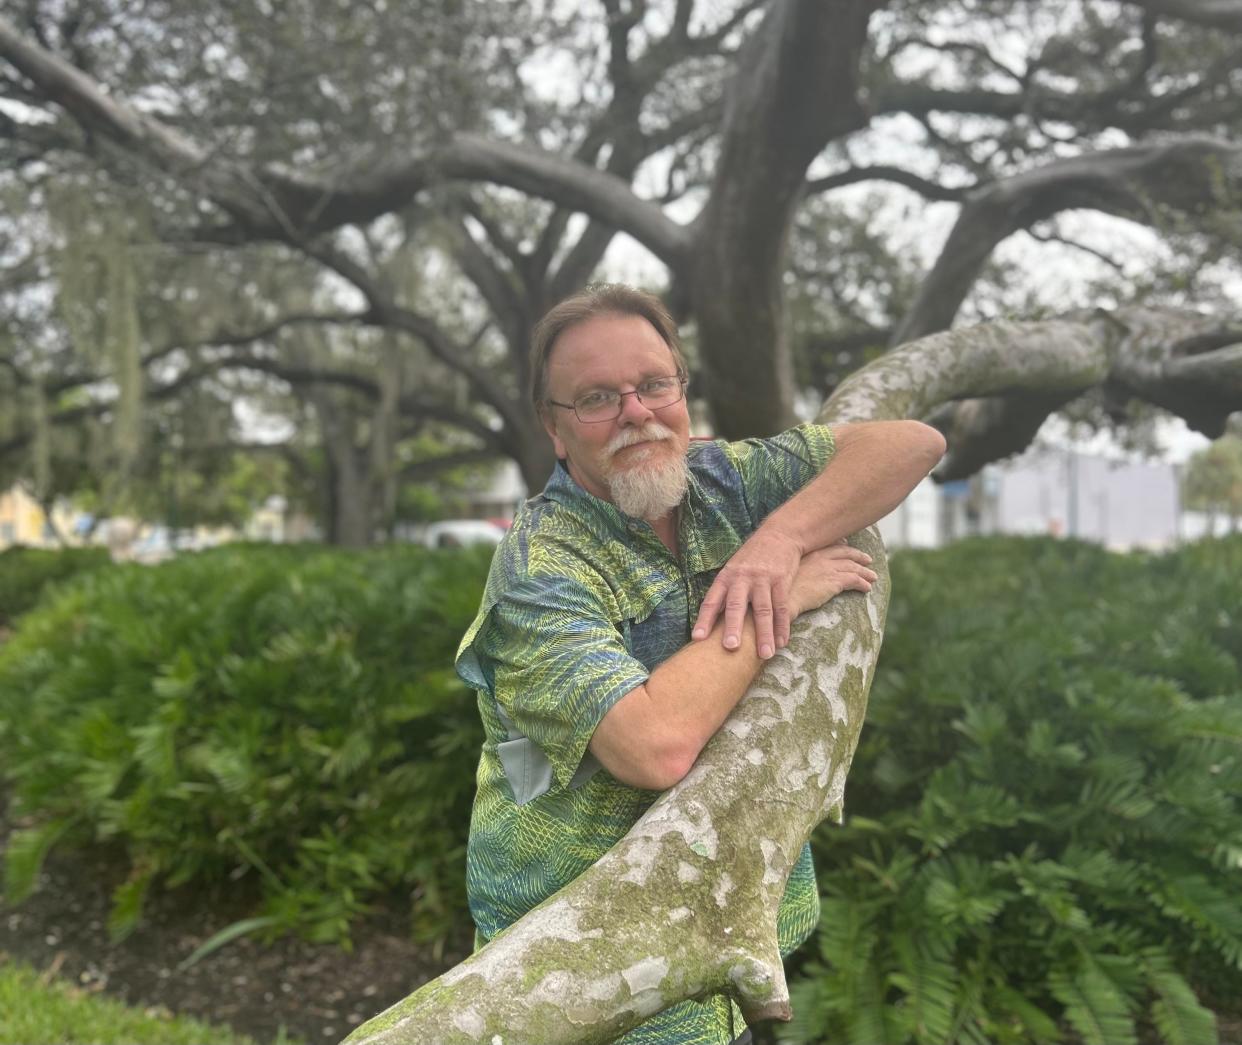 Donald Ullom has served as senior arborist for the city of Sarasota since 2016, building on a career that began in the Sequoia National Forest in California.